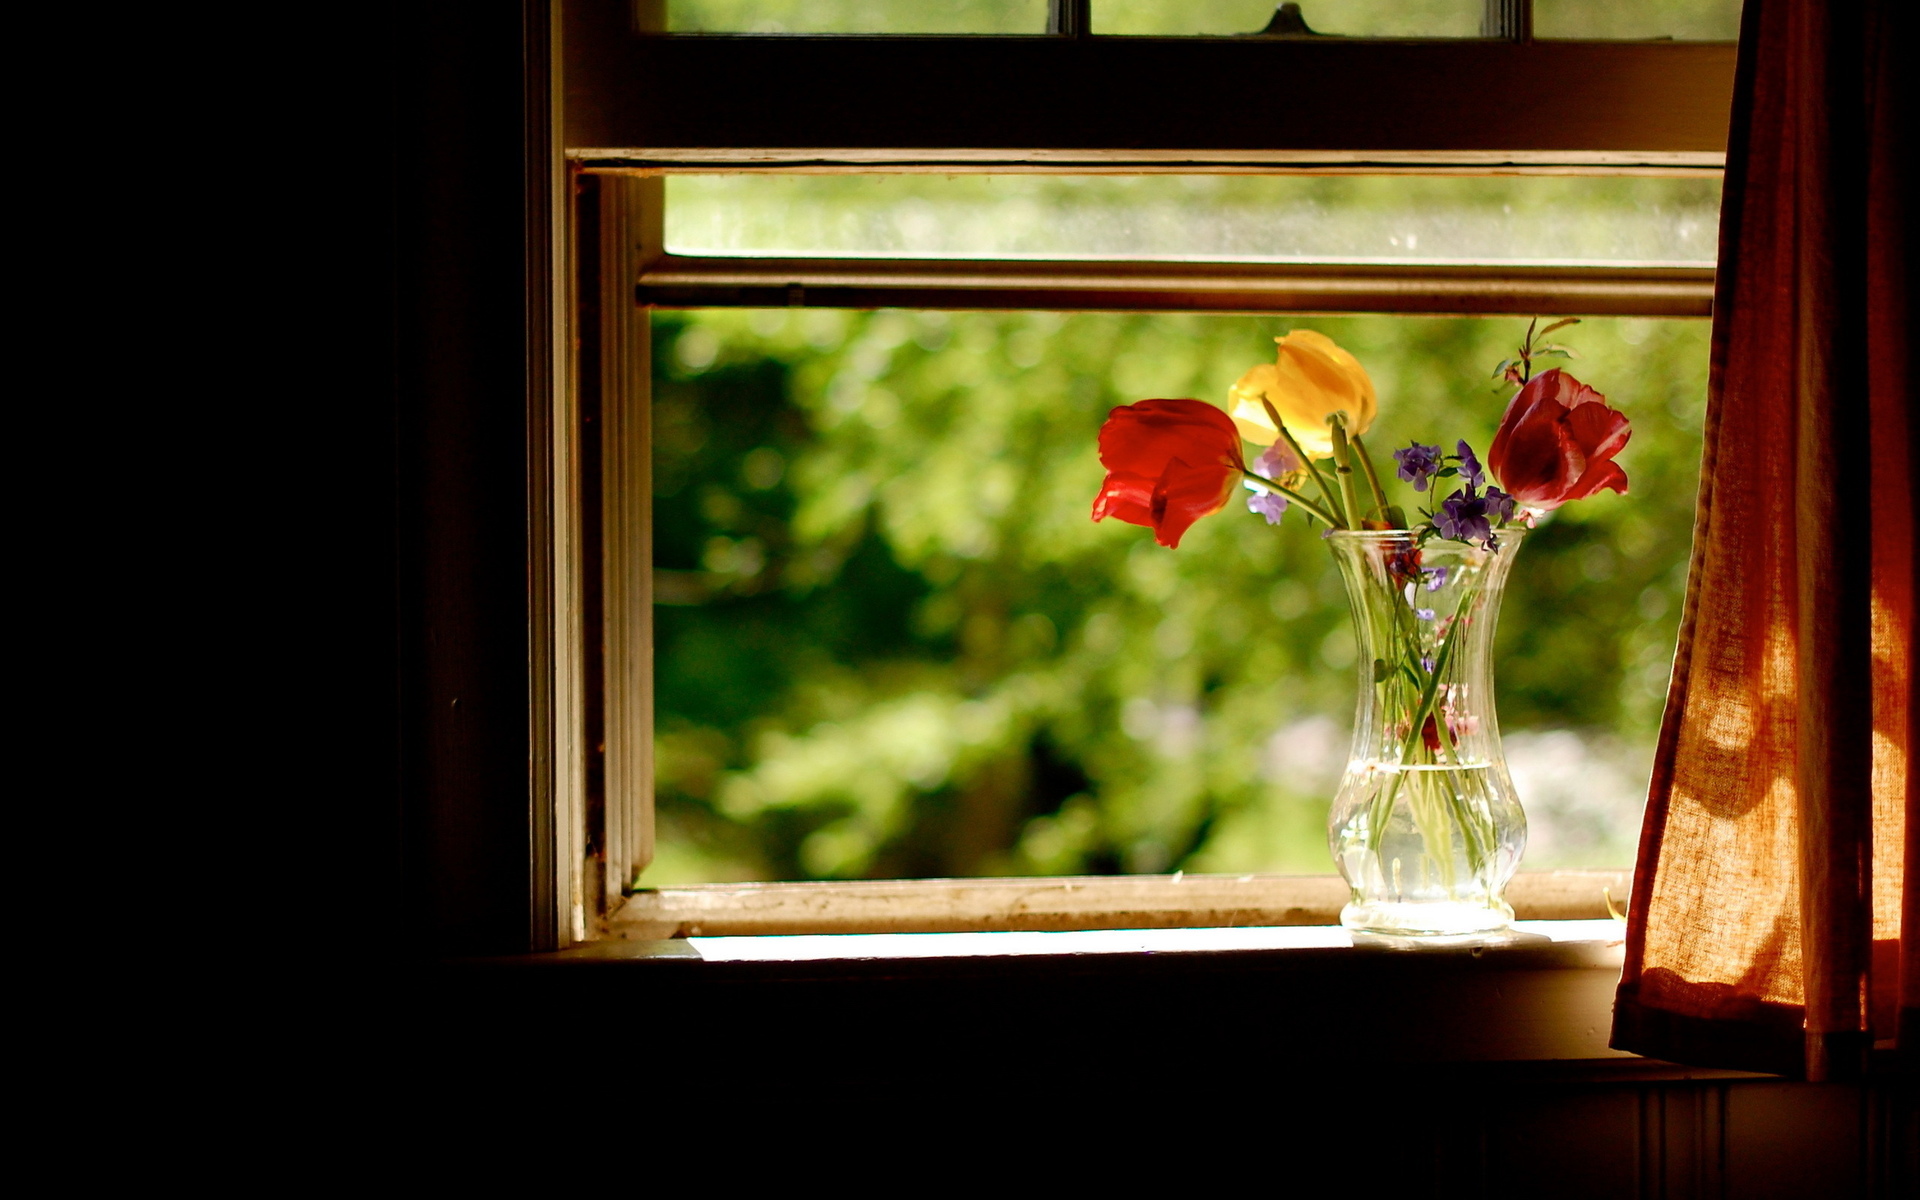 nature, Flowers, Still, Life, Vase, Glass, Petals, Colors, Window, Curtain, Room, Photography, Water, Sunlight Wallpaper